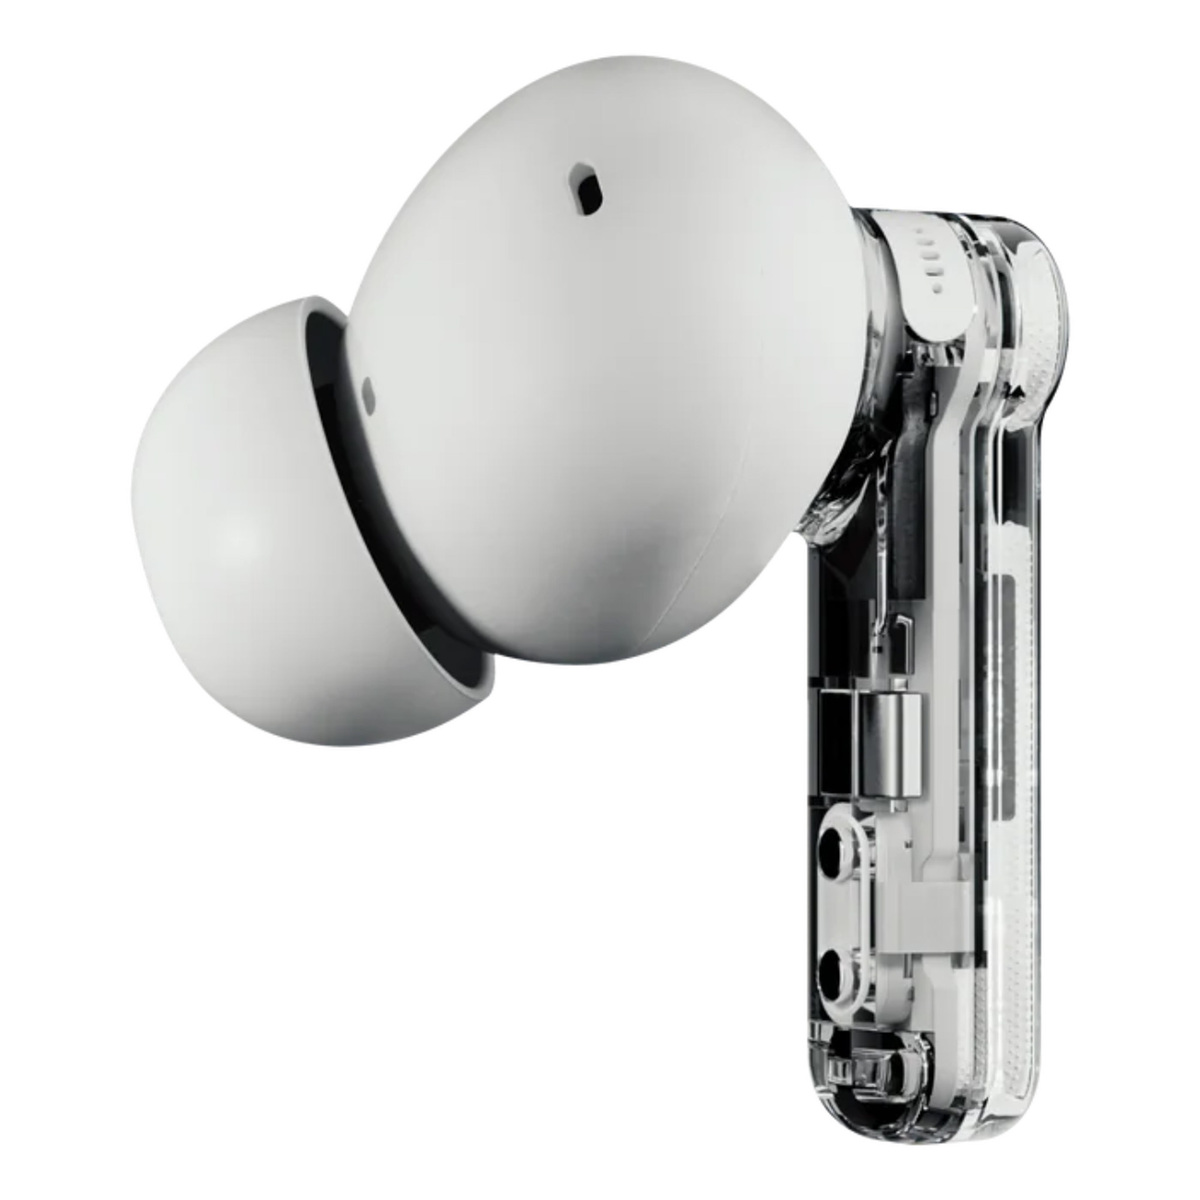 Nothing Ear(a) True Wireless Earbuds with Mic, White, B162